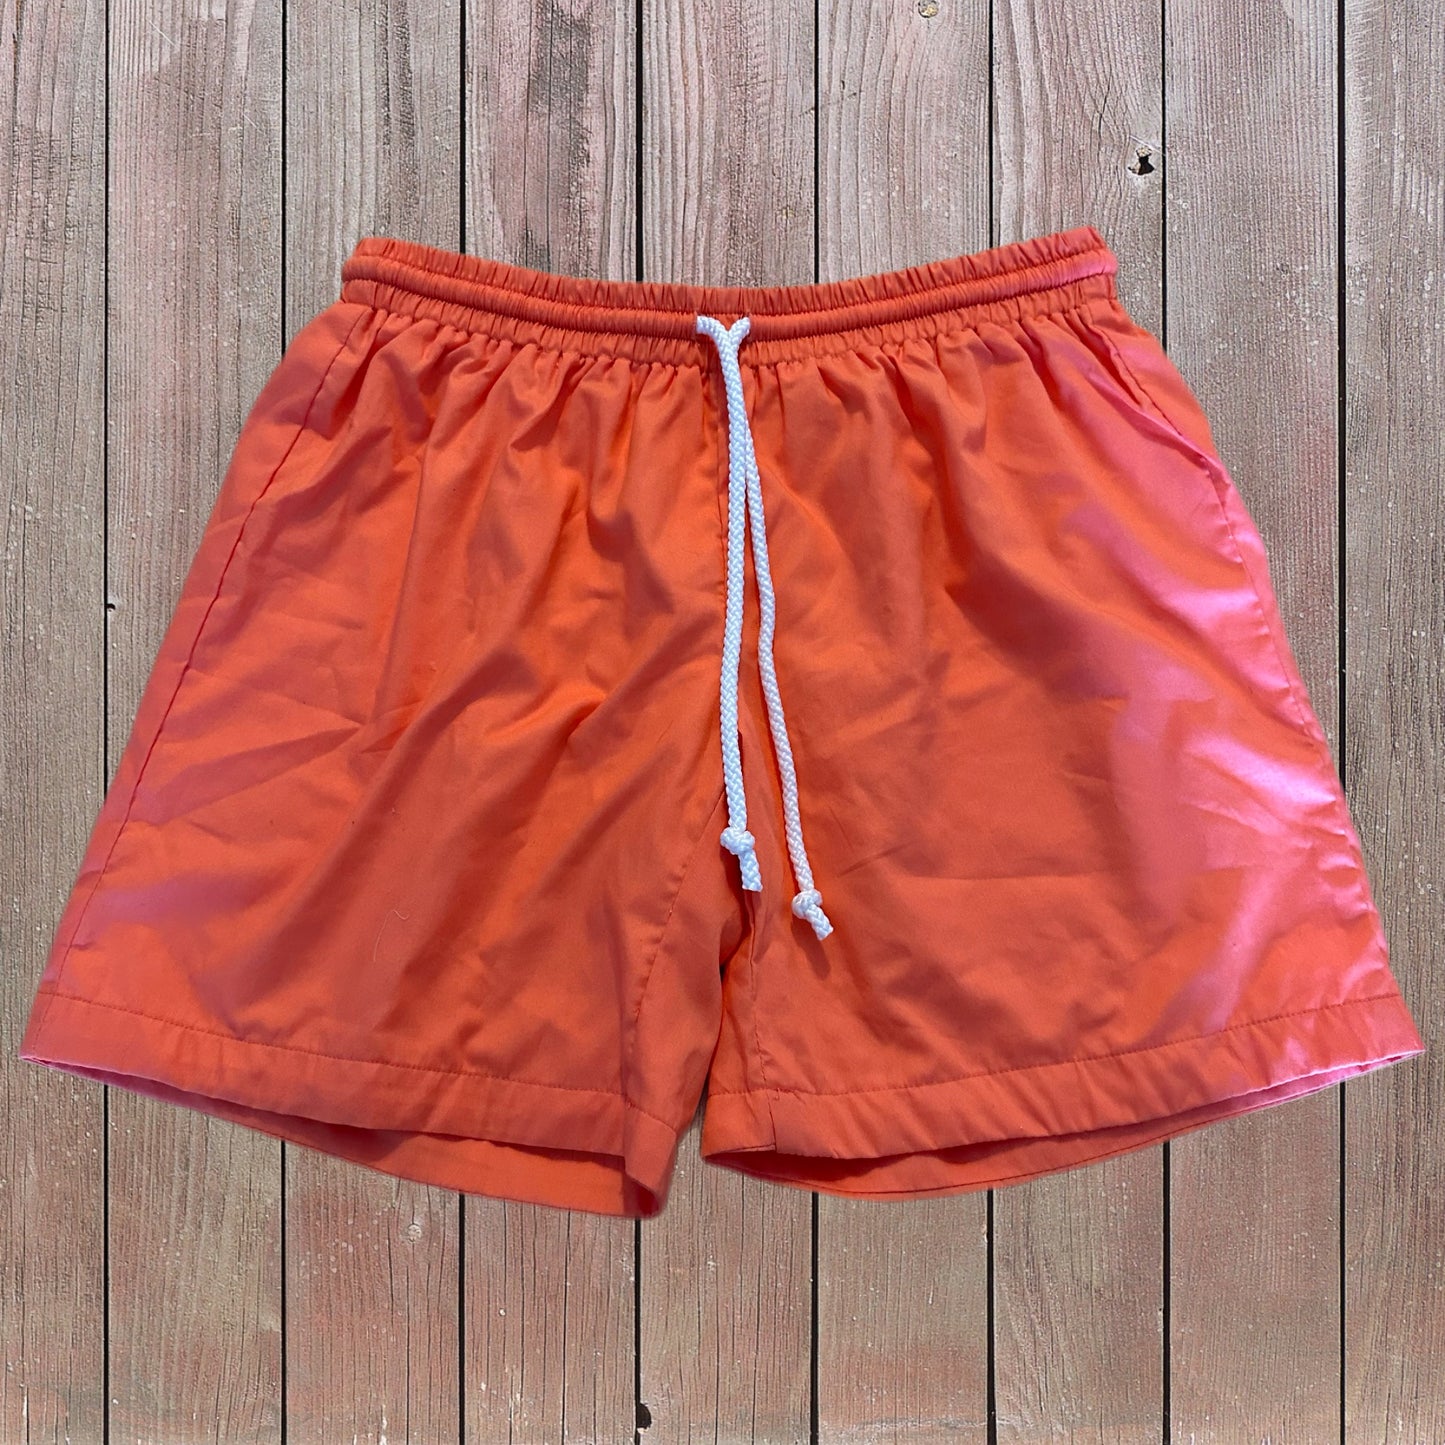 Coral Swim Shorts for Dad (RTS)